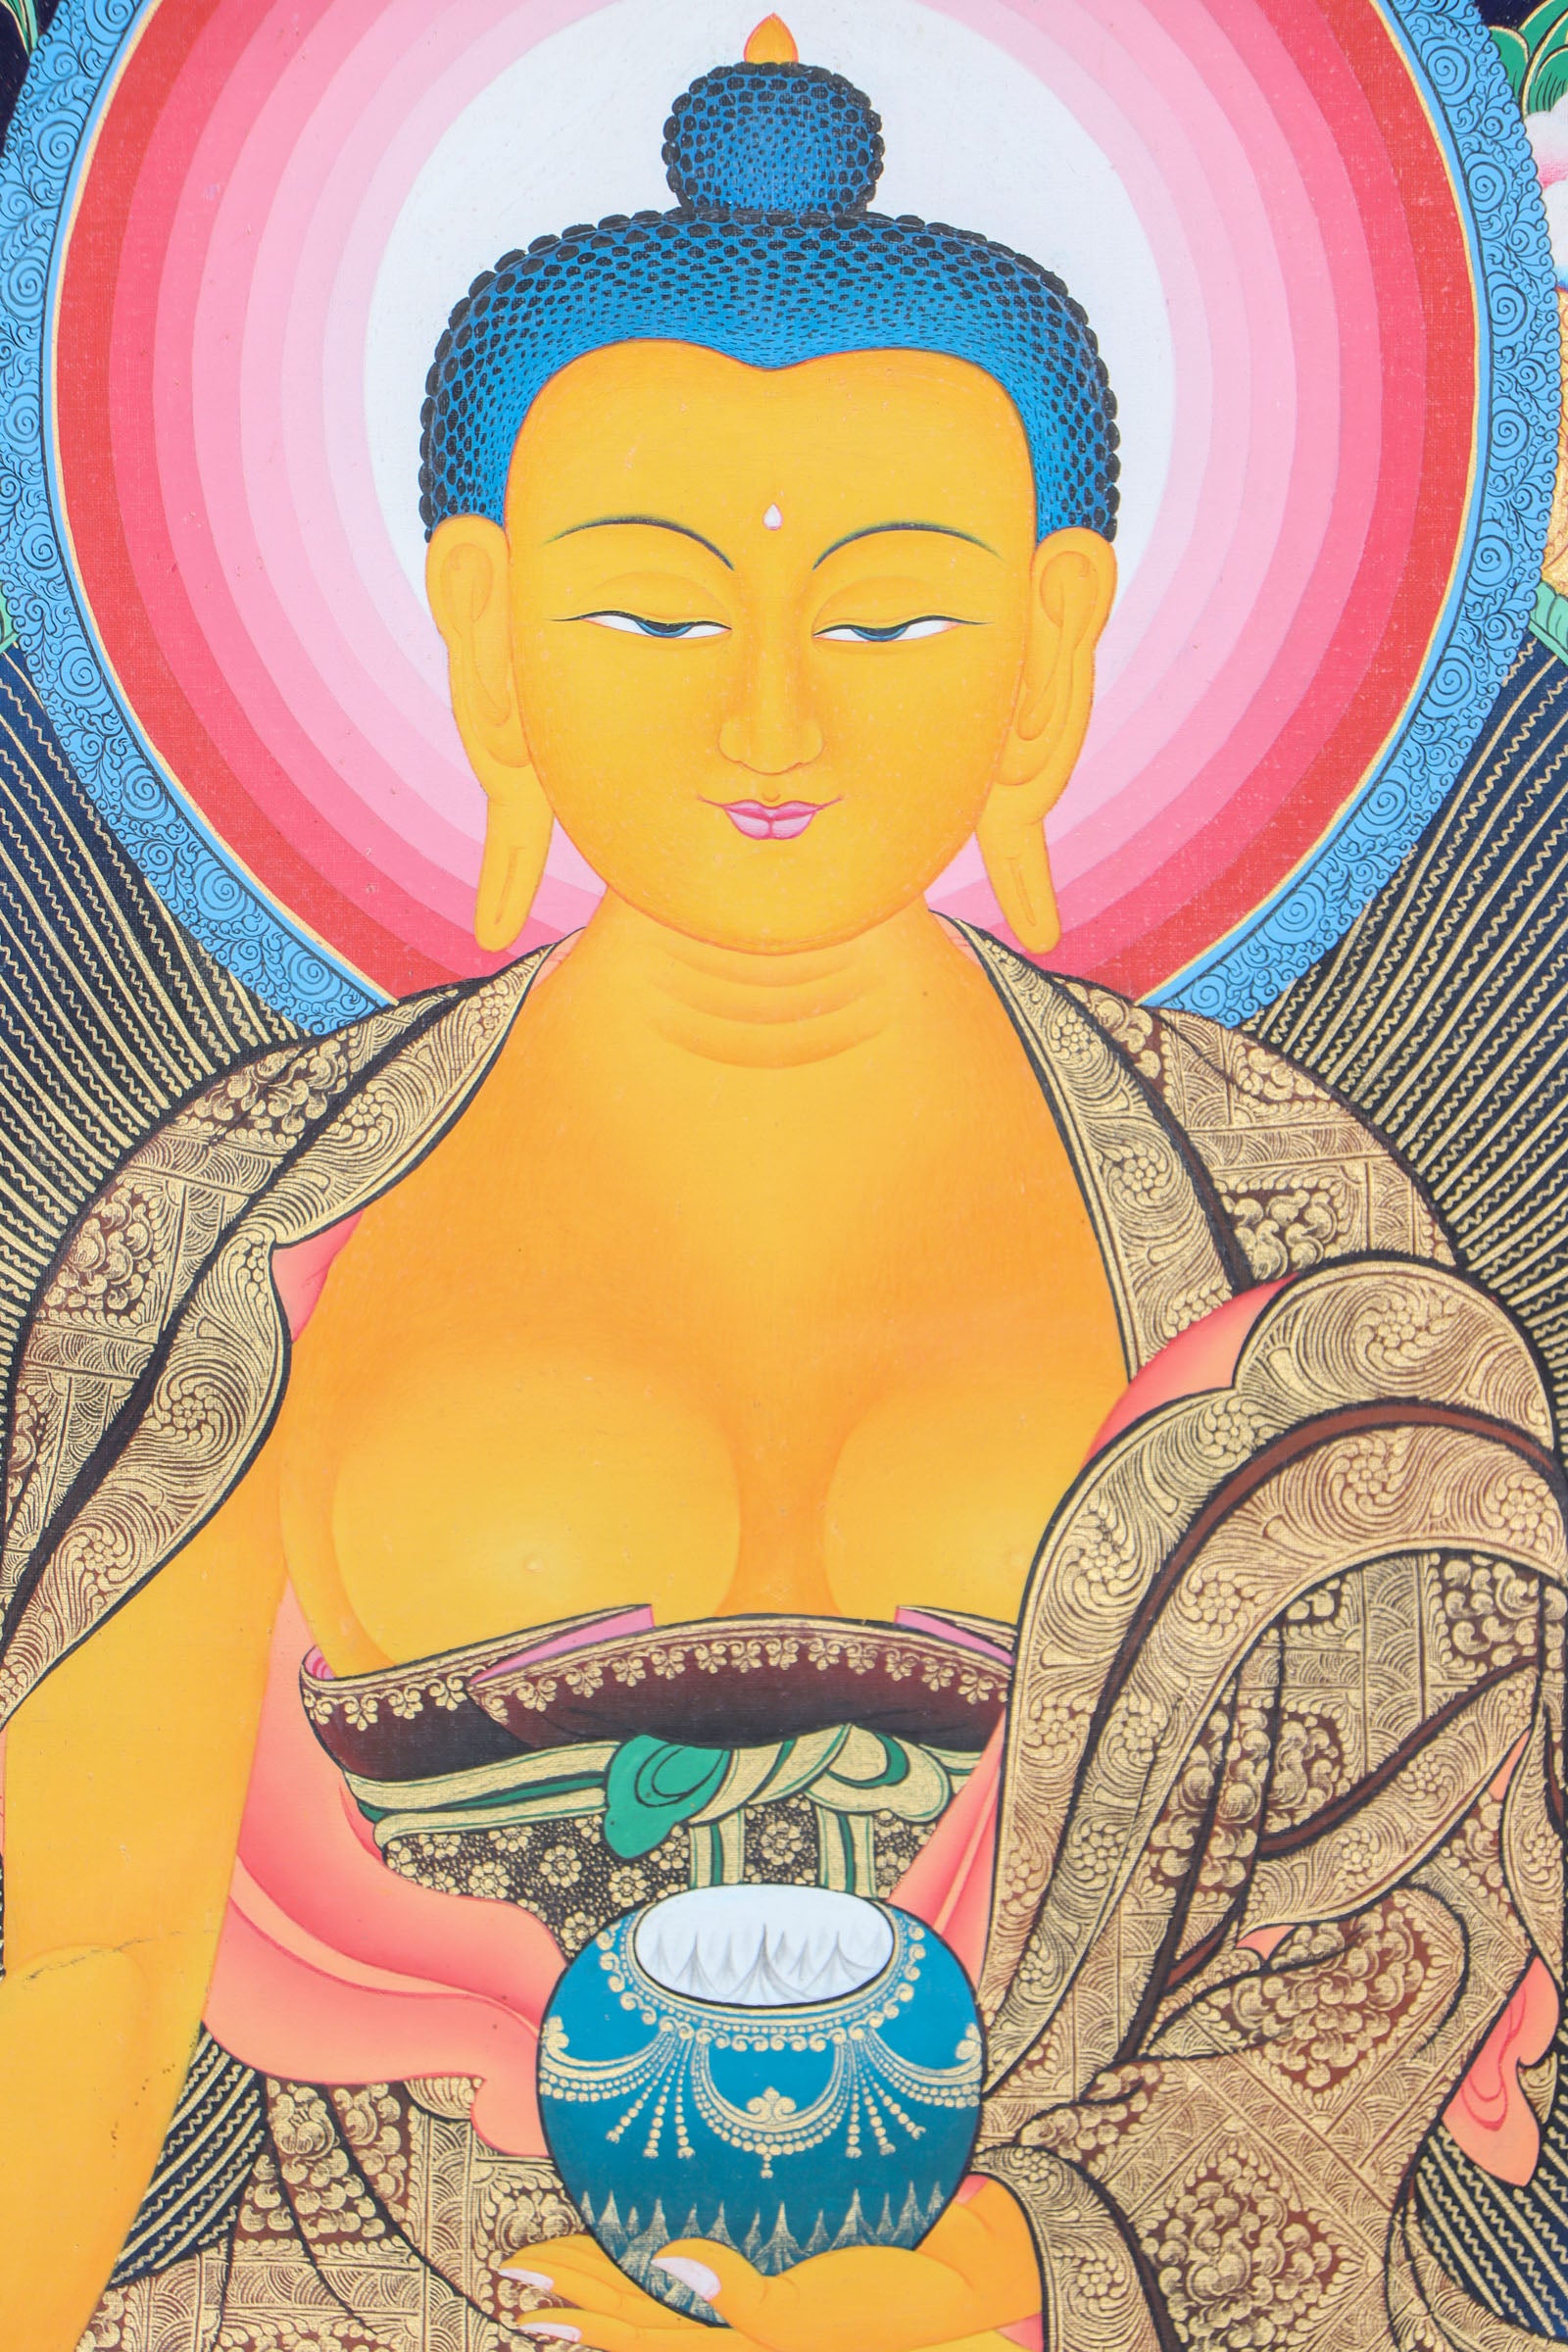 1000 Buddha Thangka Painting for enlightenment and infinite knowledge of Buddha.